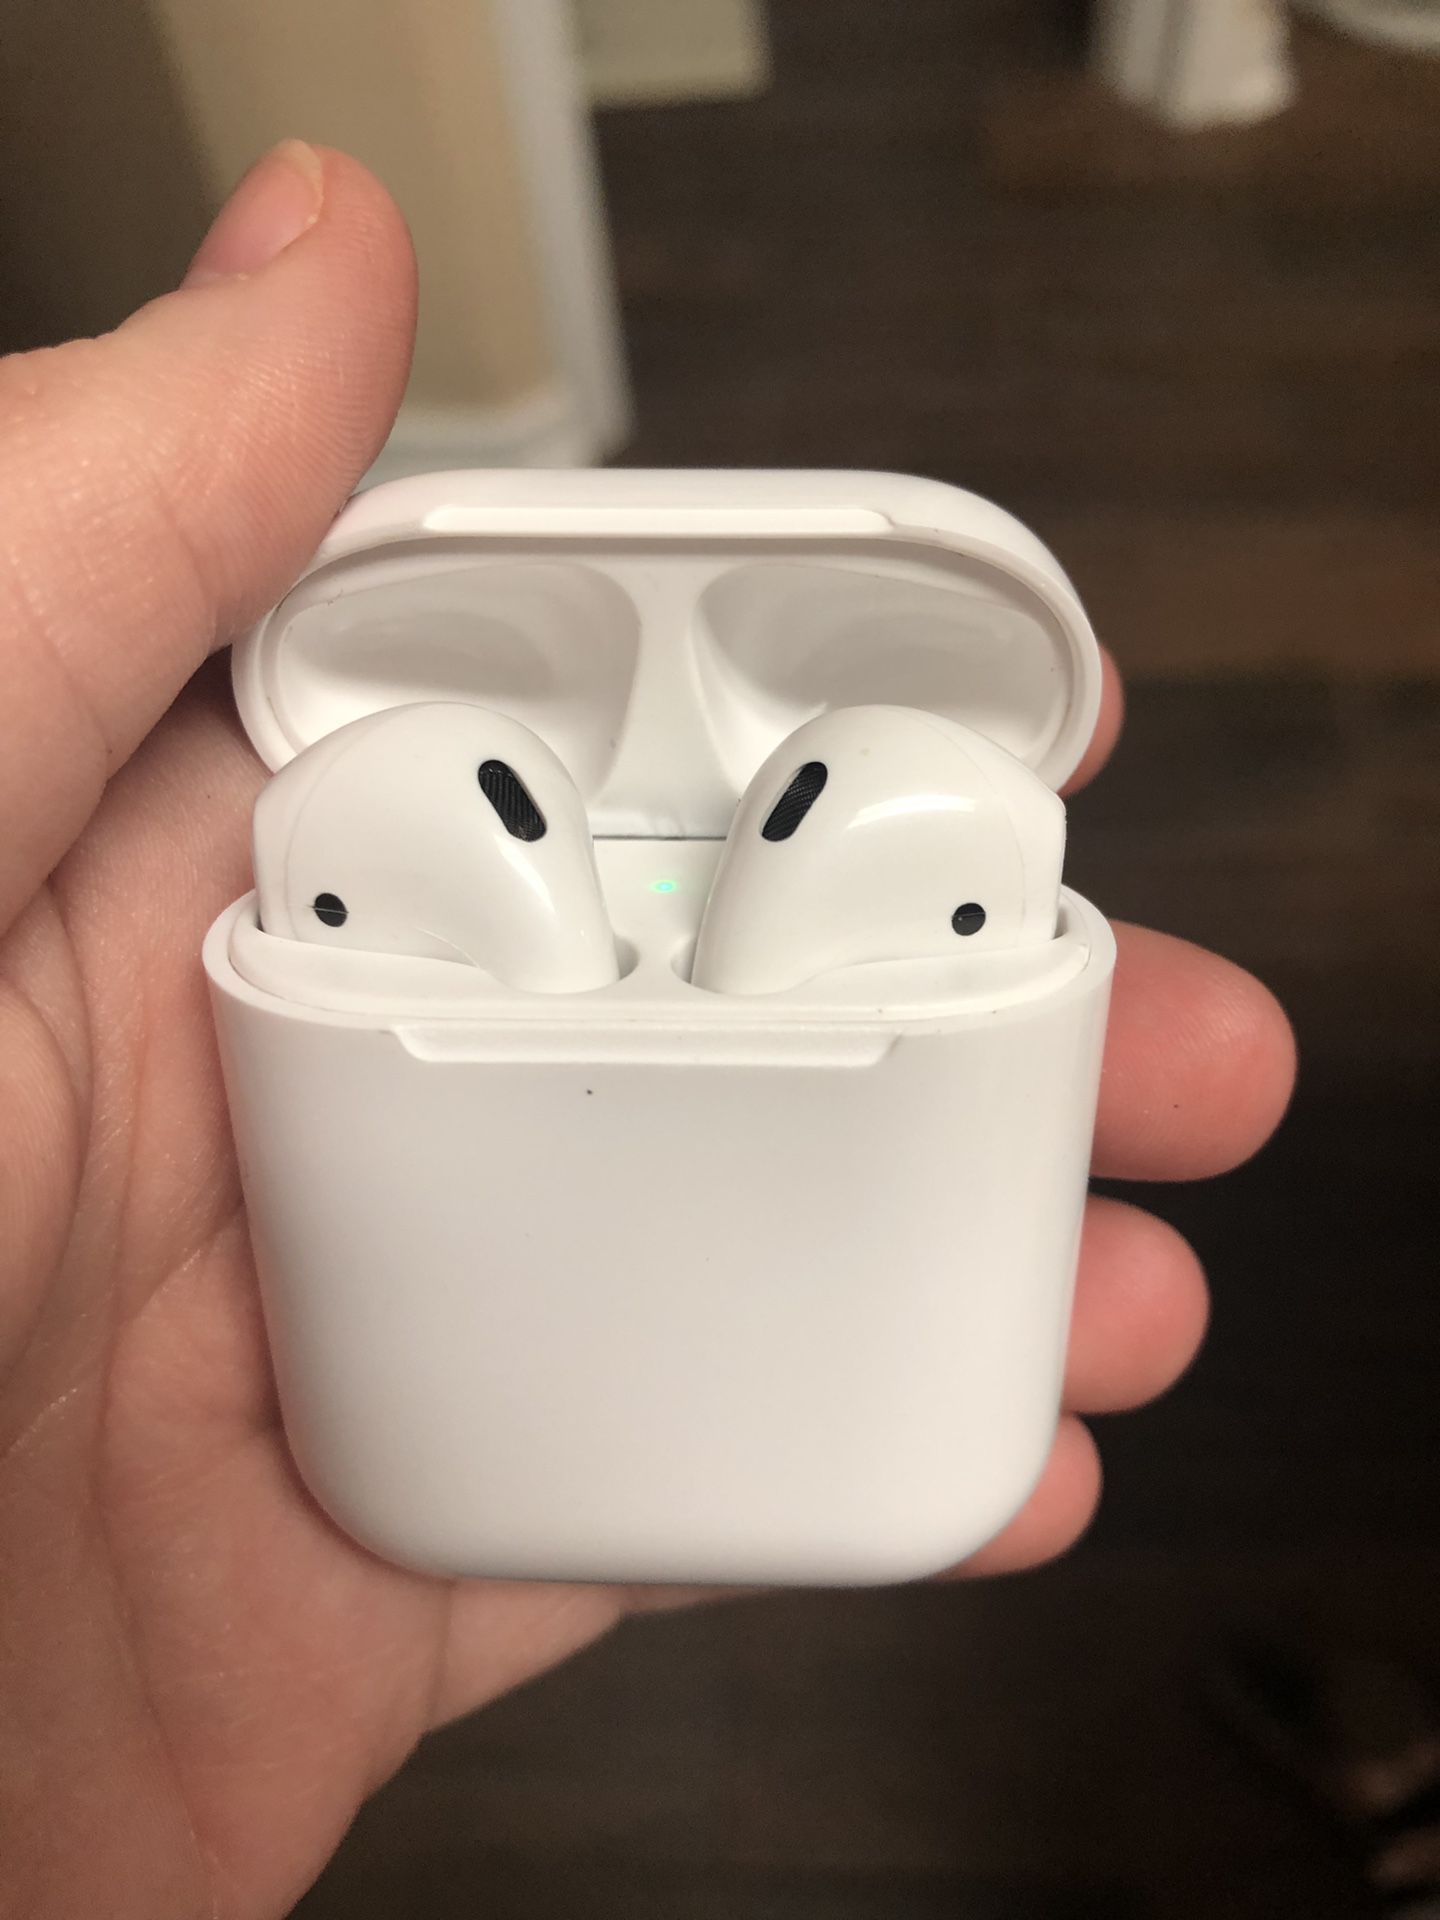 1st Generation AirPods